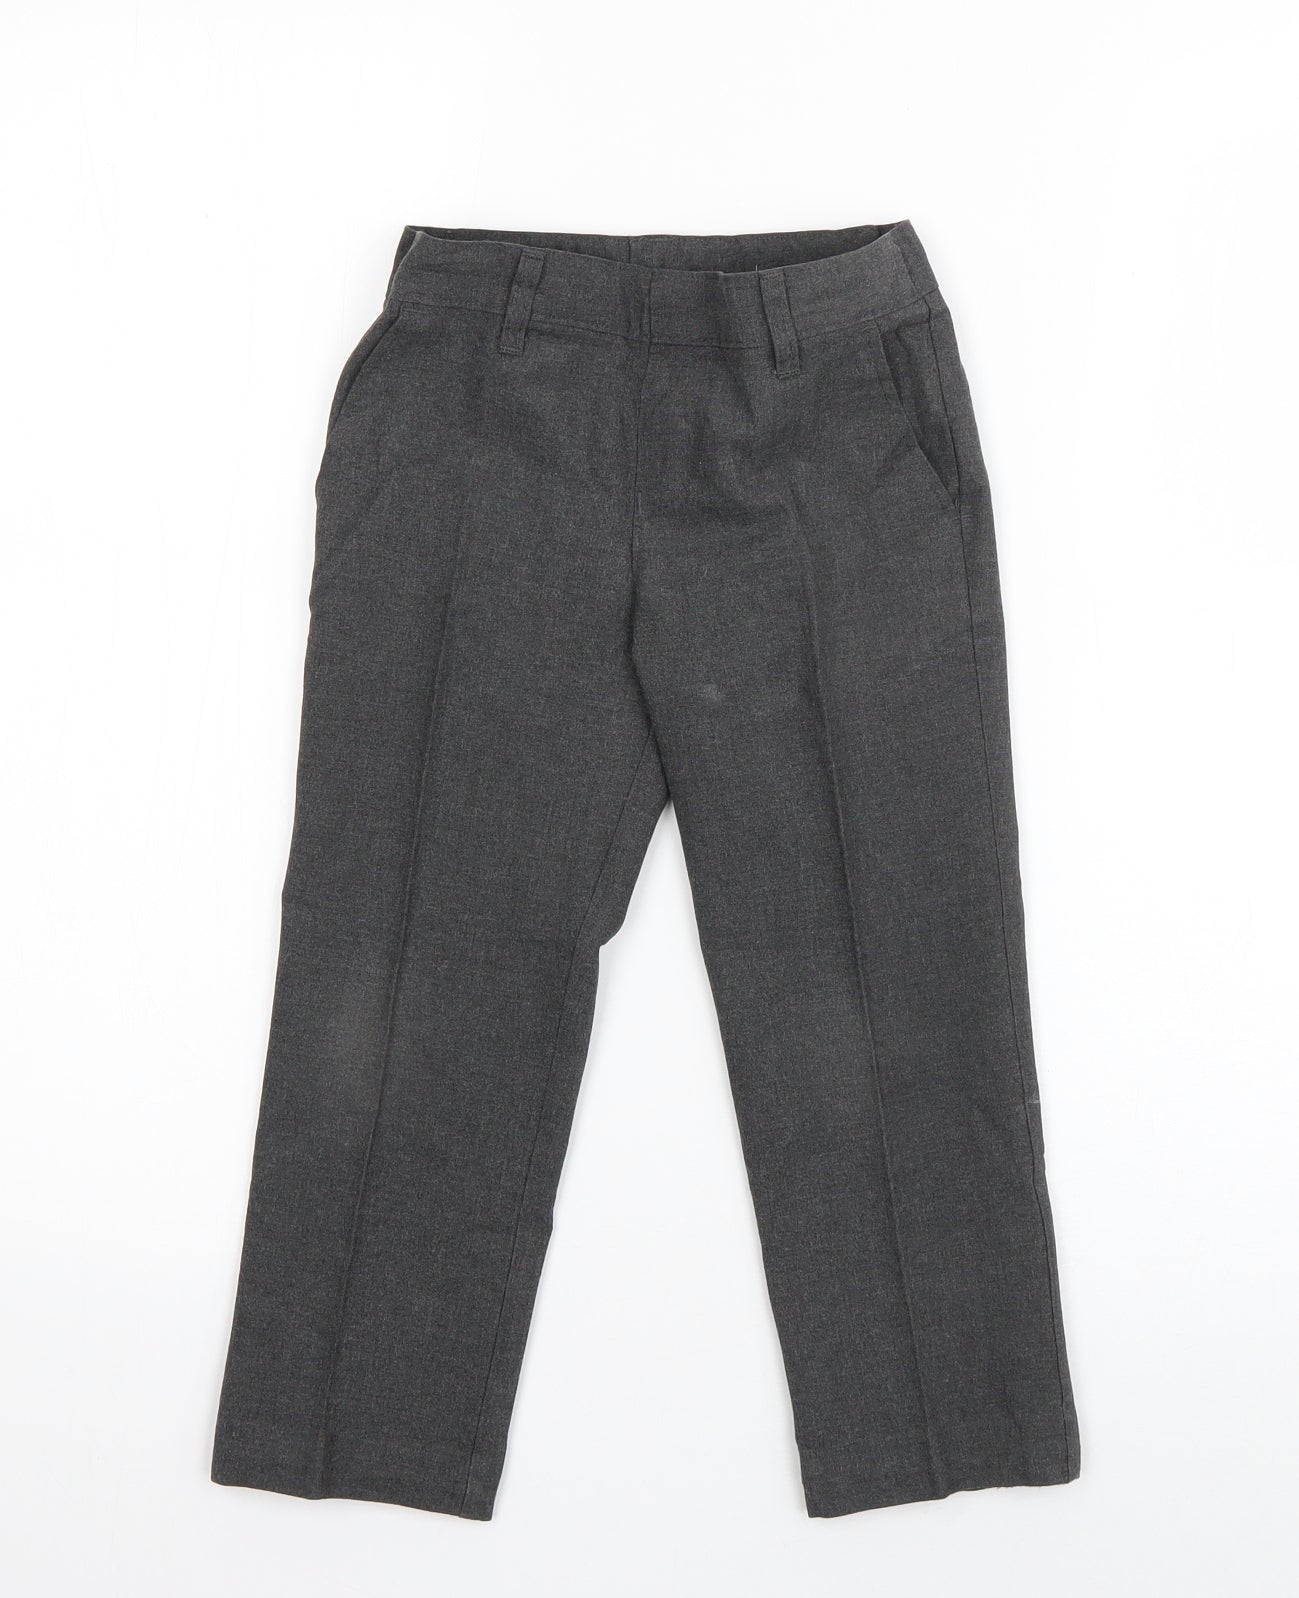 Marks and Spencer Boys Grey  Polyester Dress Pants Trousers Size 3-4 Years  Regular